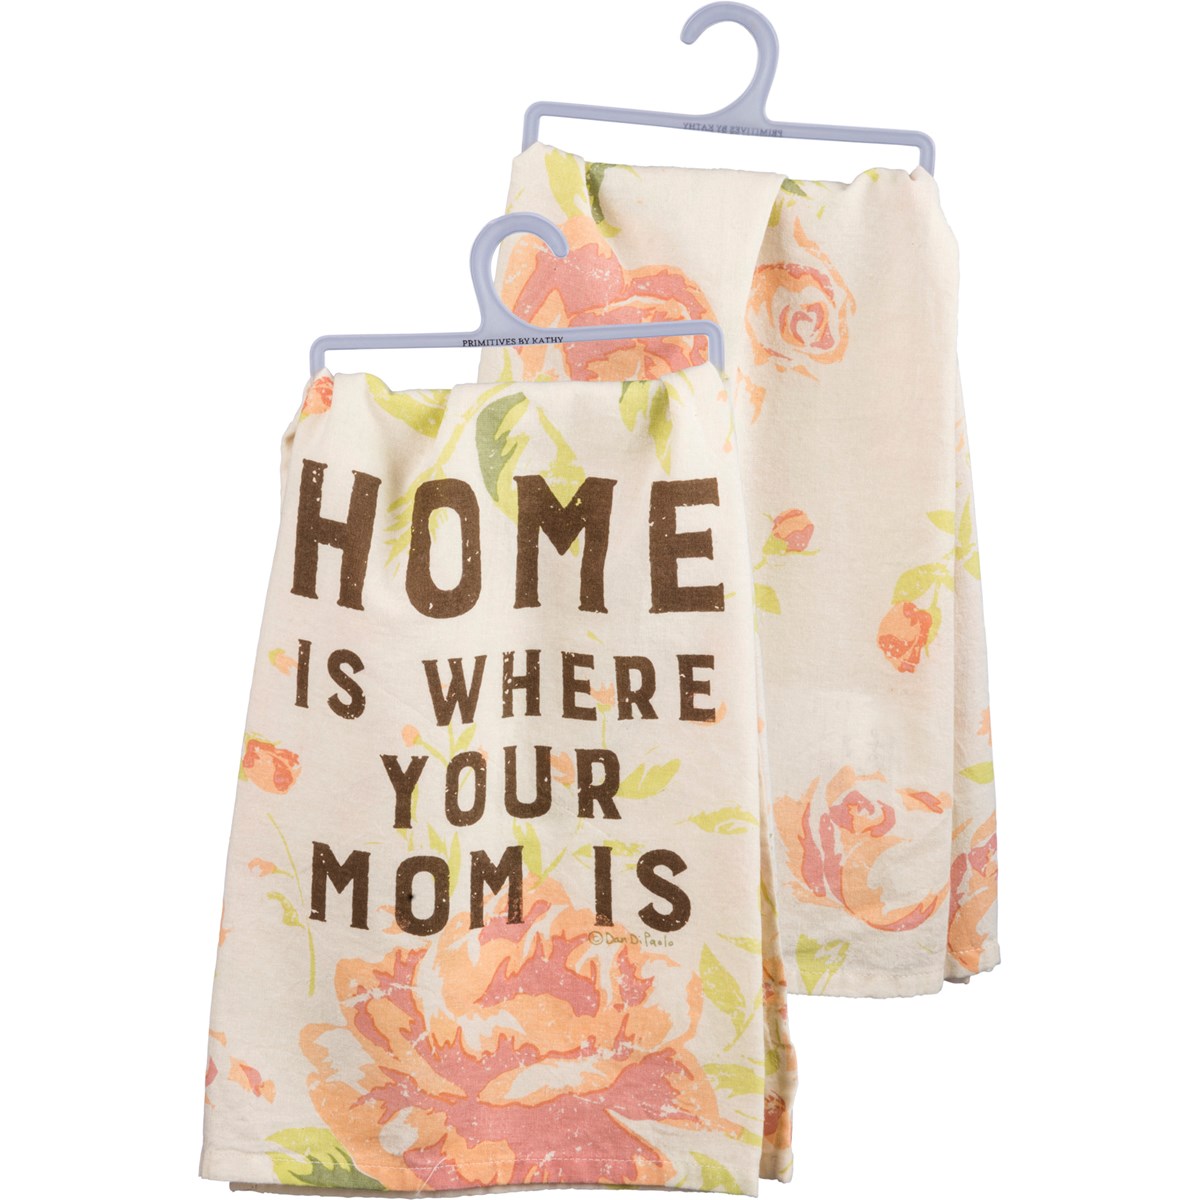 Home Is Where Your Mom Is Kitchen Towel - Cotton